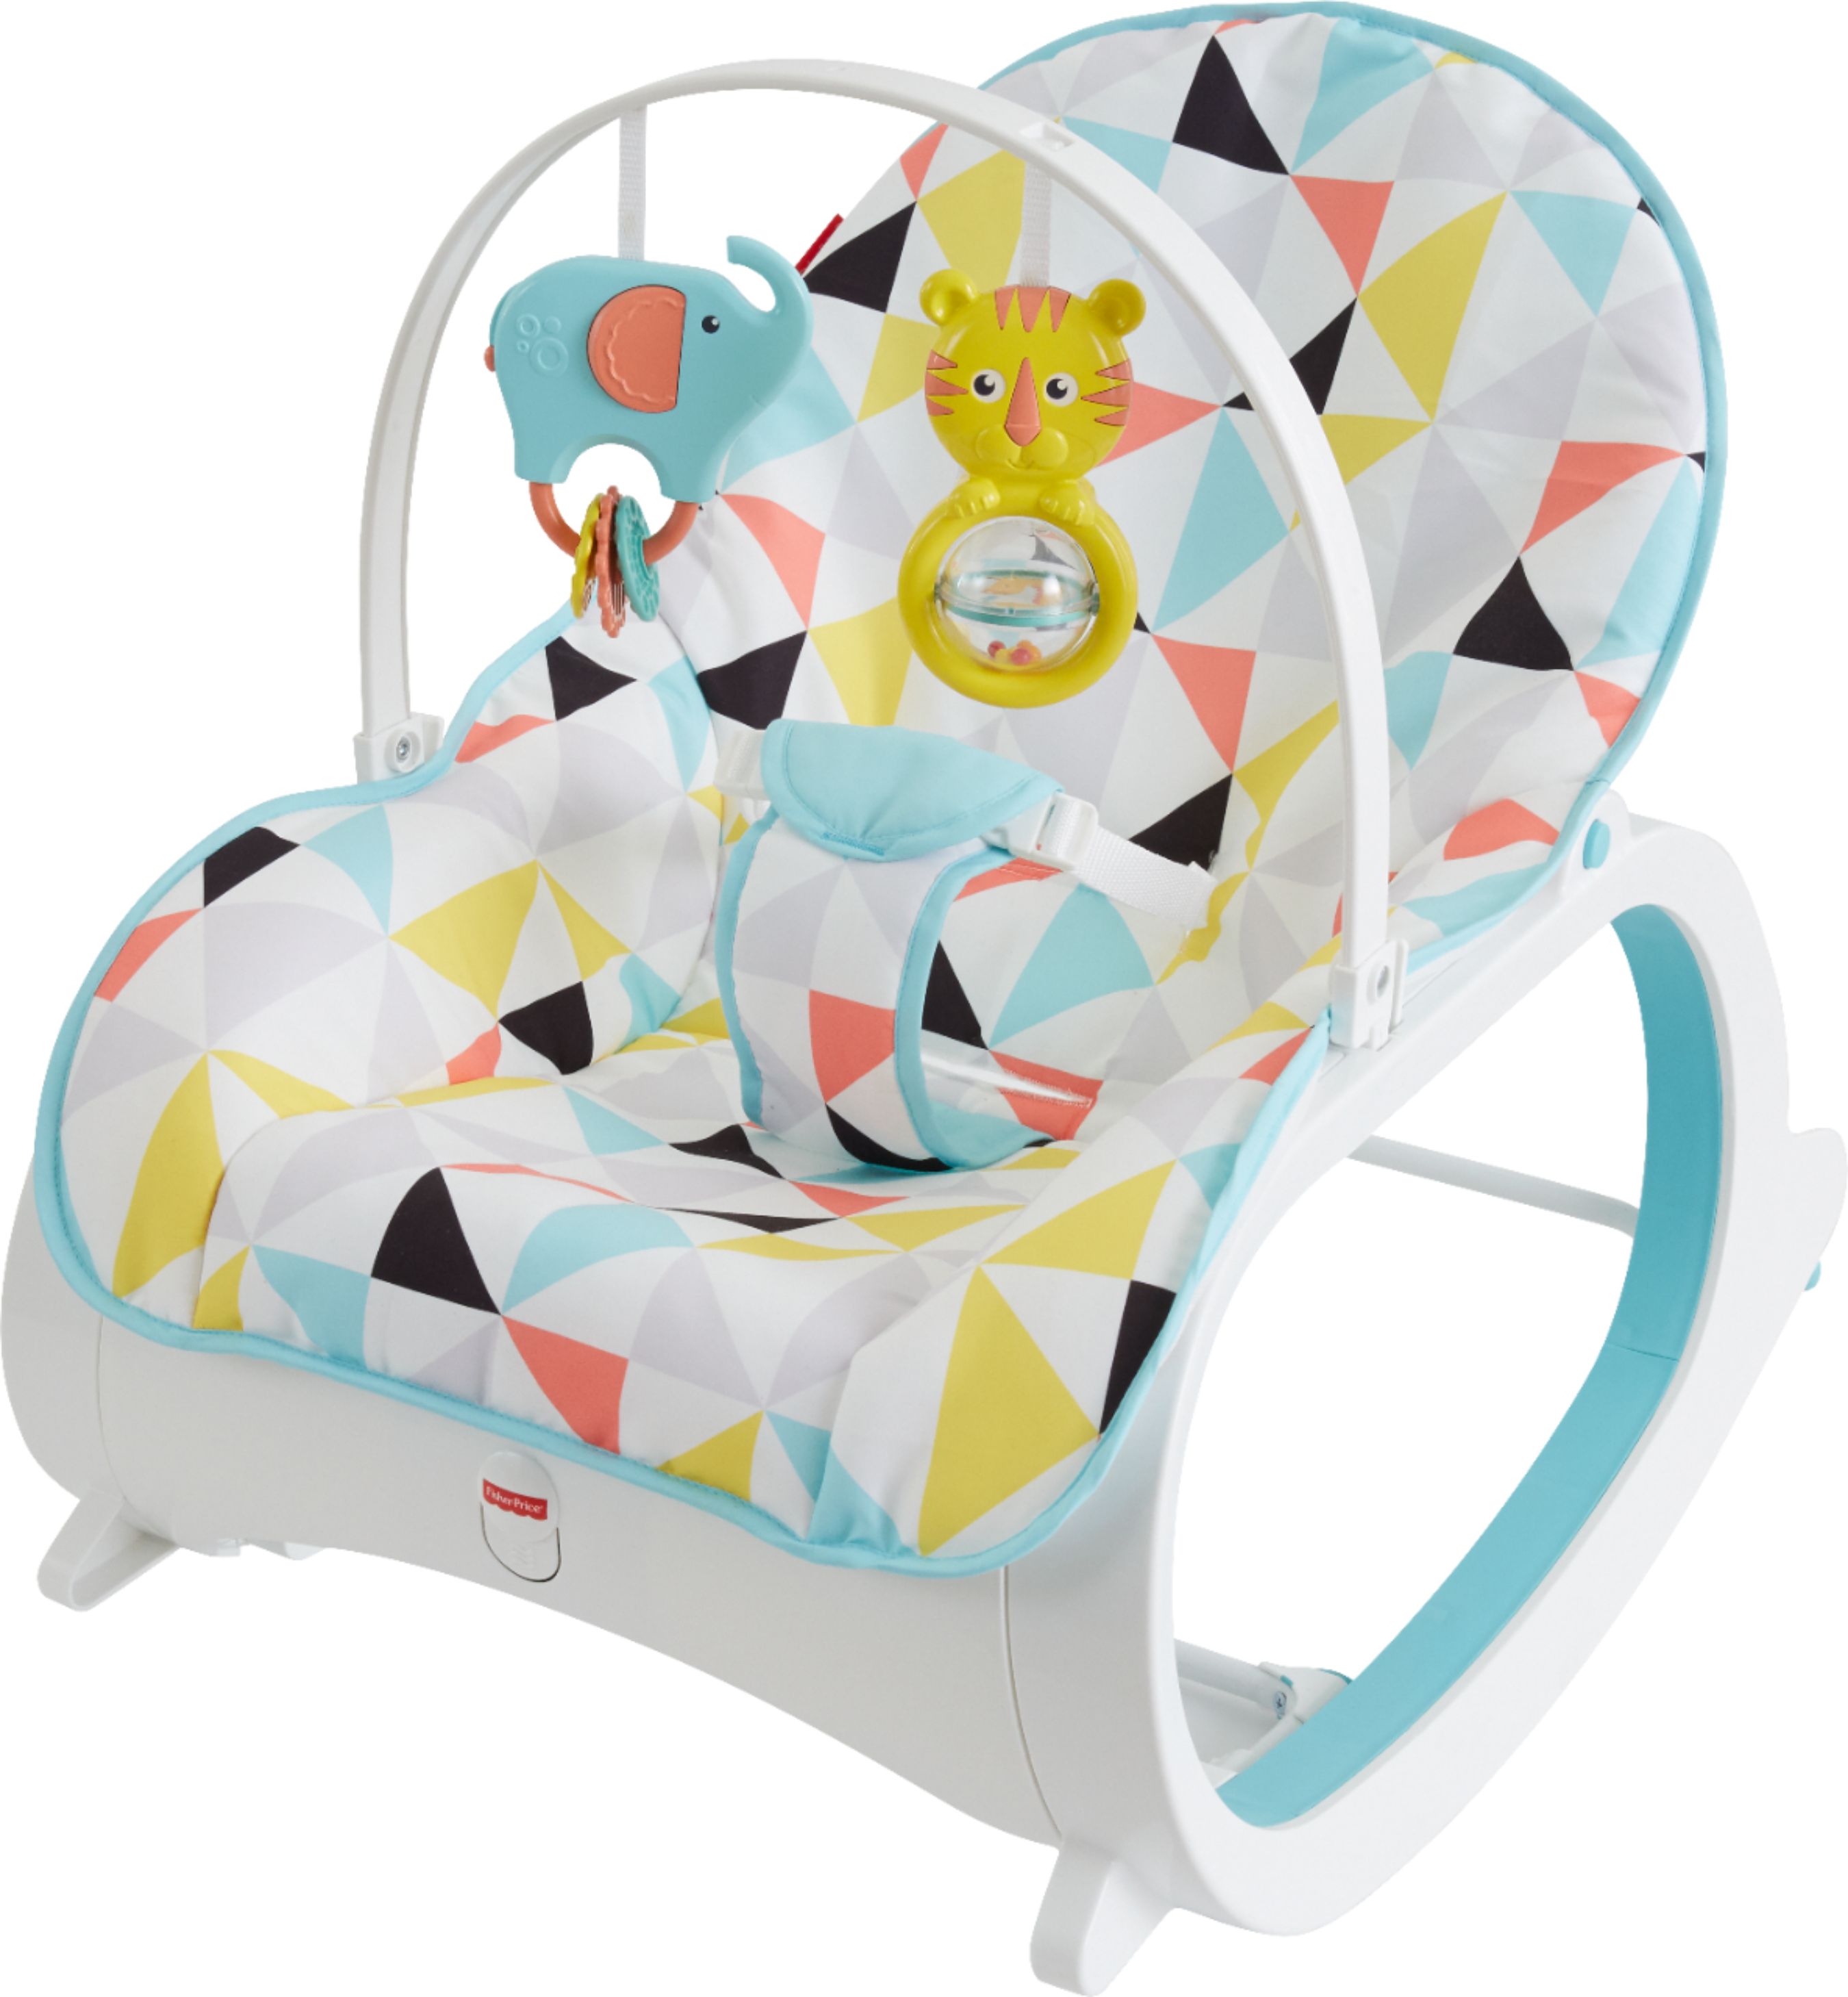 Left View: [$15 Savings] Fisher Price Infant to Toddler Rocker with Removable Toy Bar with Free $15 Gift Card